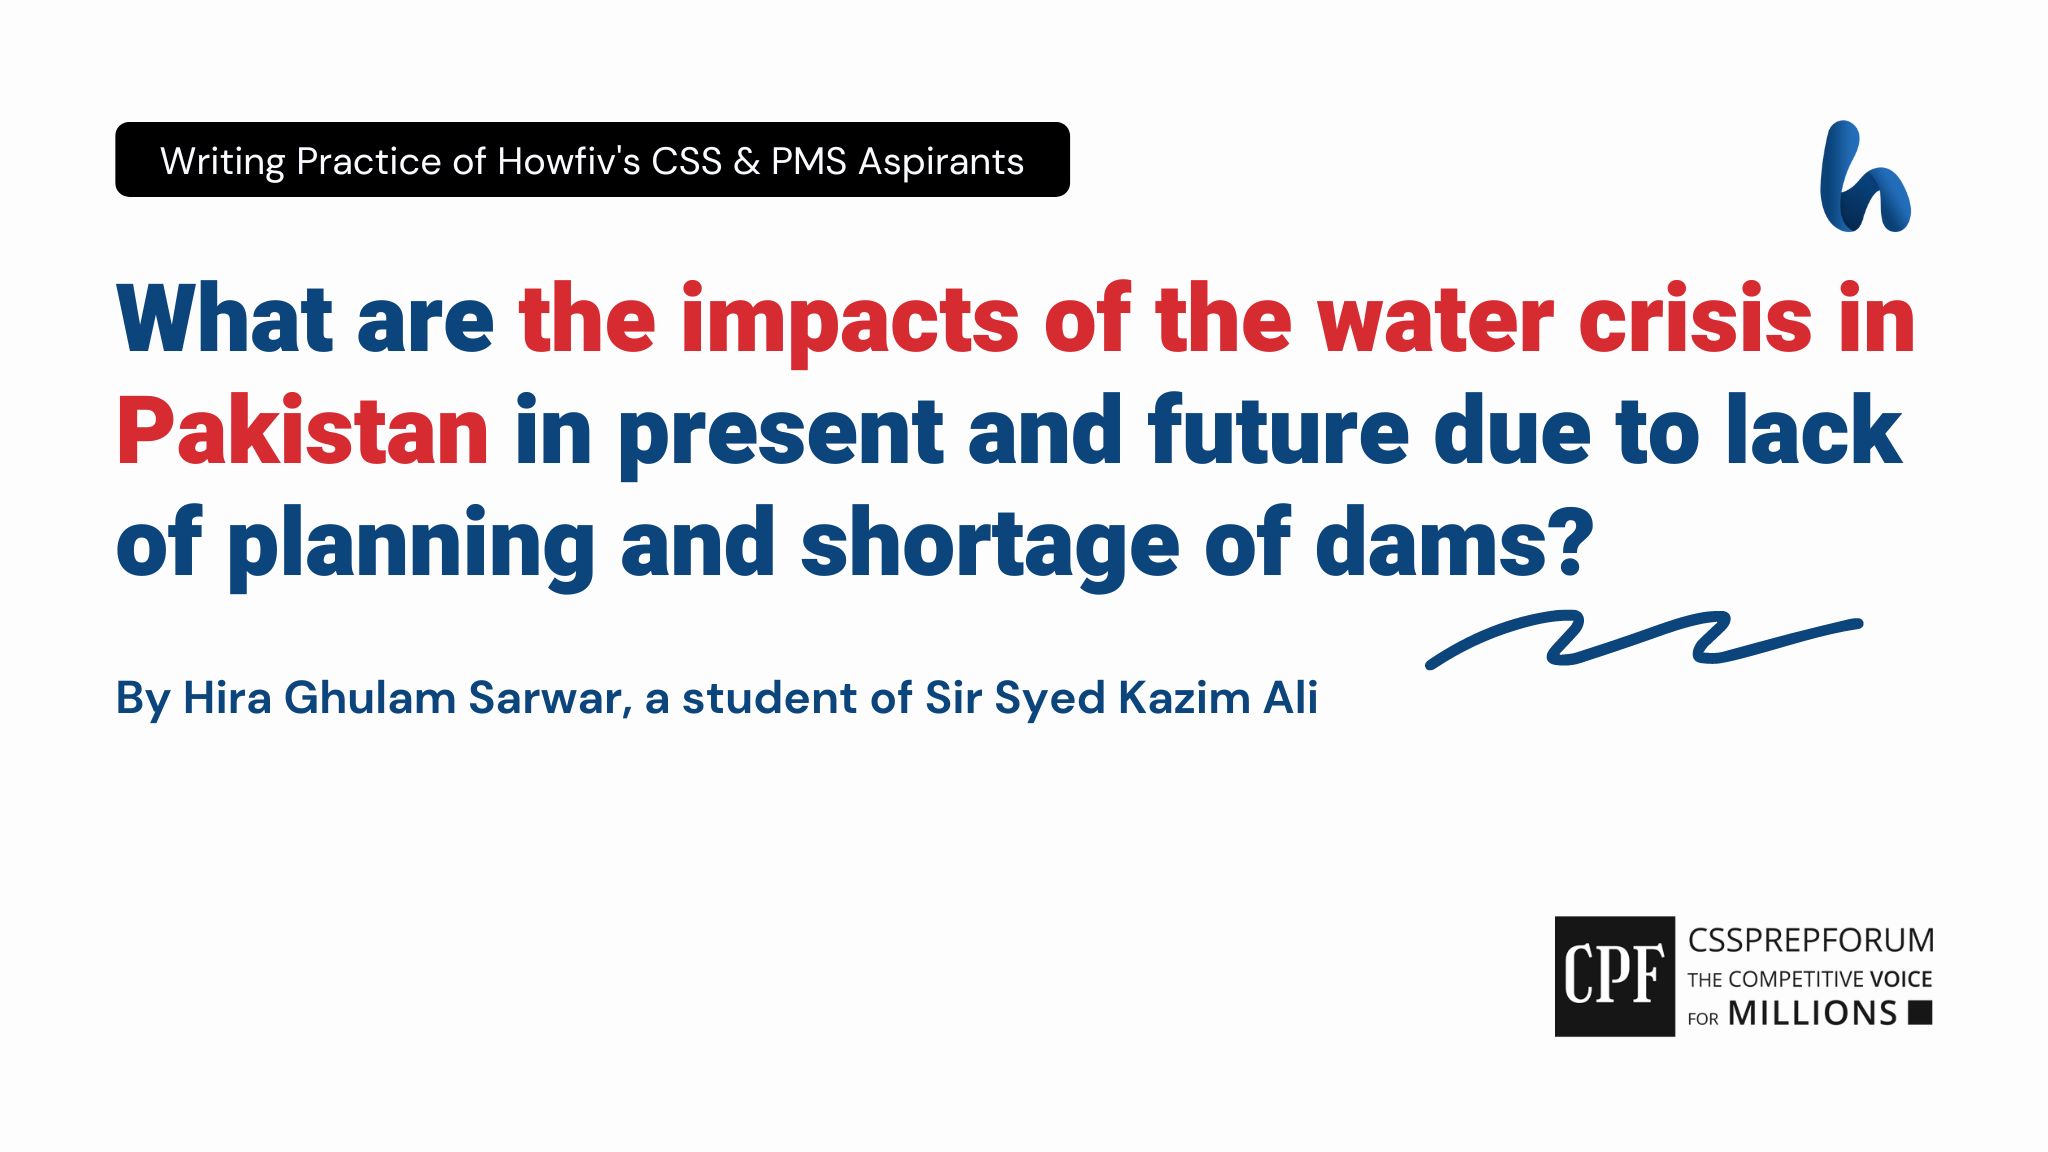 What are the impacts of the water crisis in Pakistan in present and